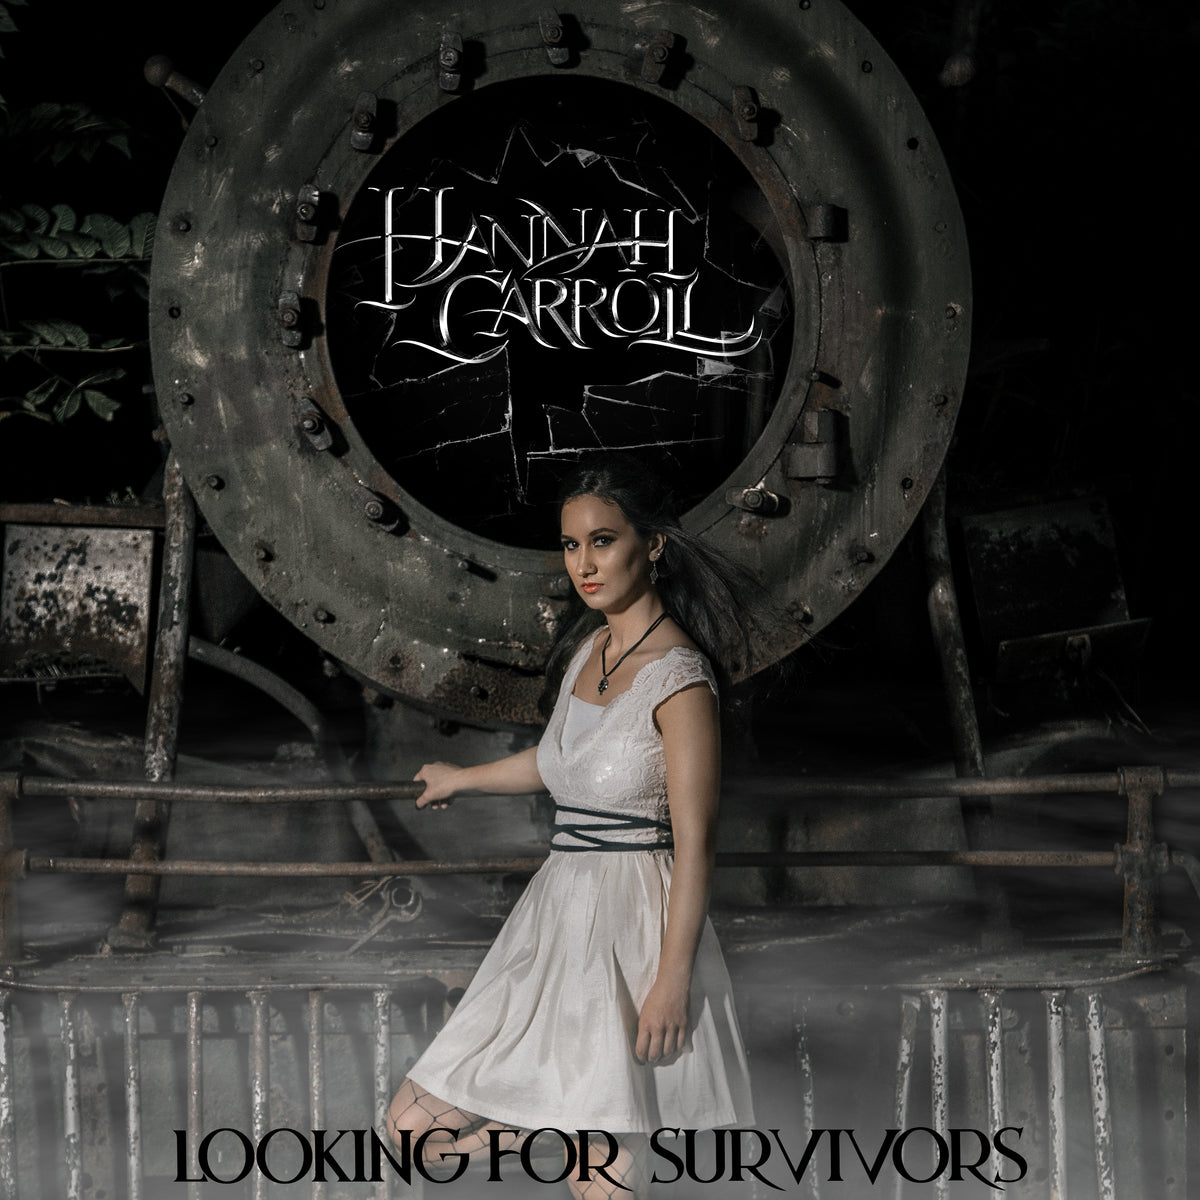 Looking for Survivors cover art shows Hannah Carroll in white dress holding onto corroded metal railing in an abandoned building